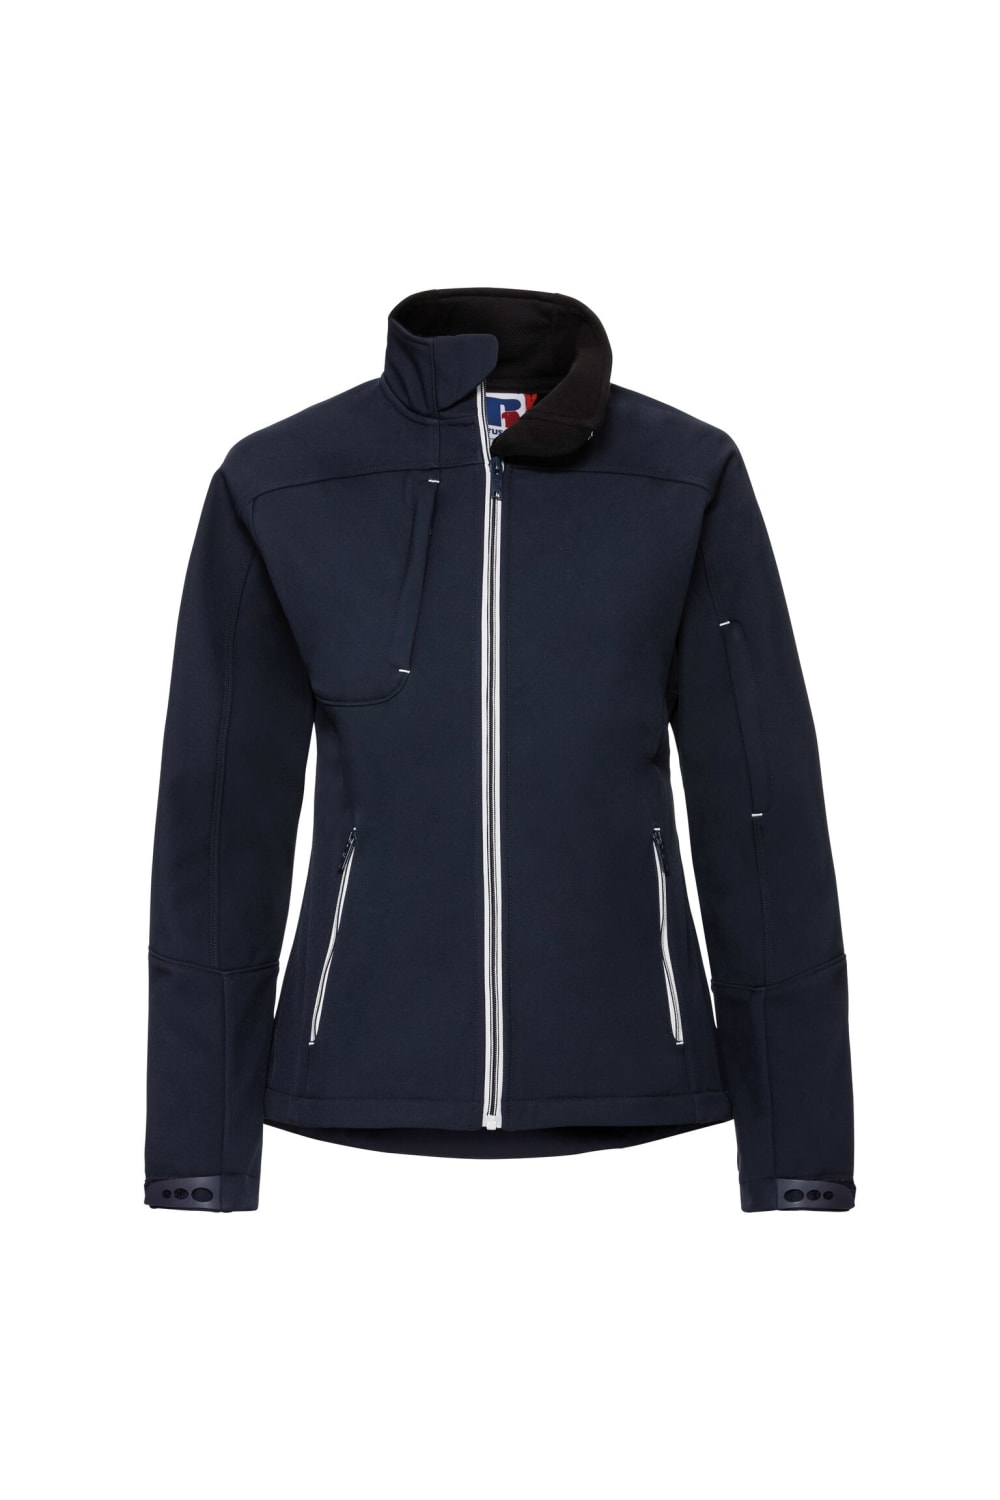 Russell Women/Ladies Bionic Softshell Jacket (French Navy)